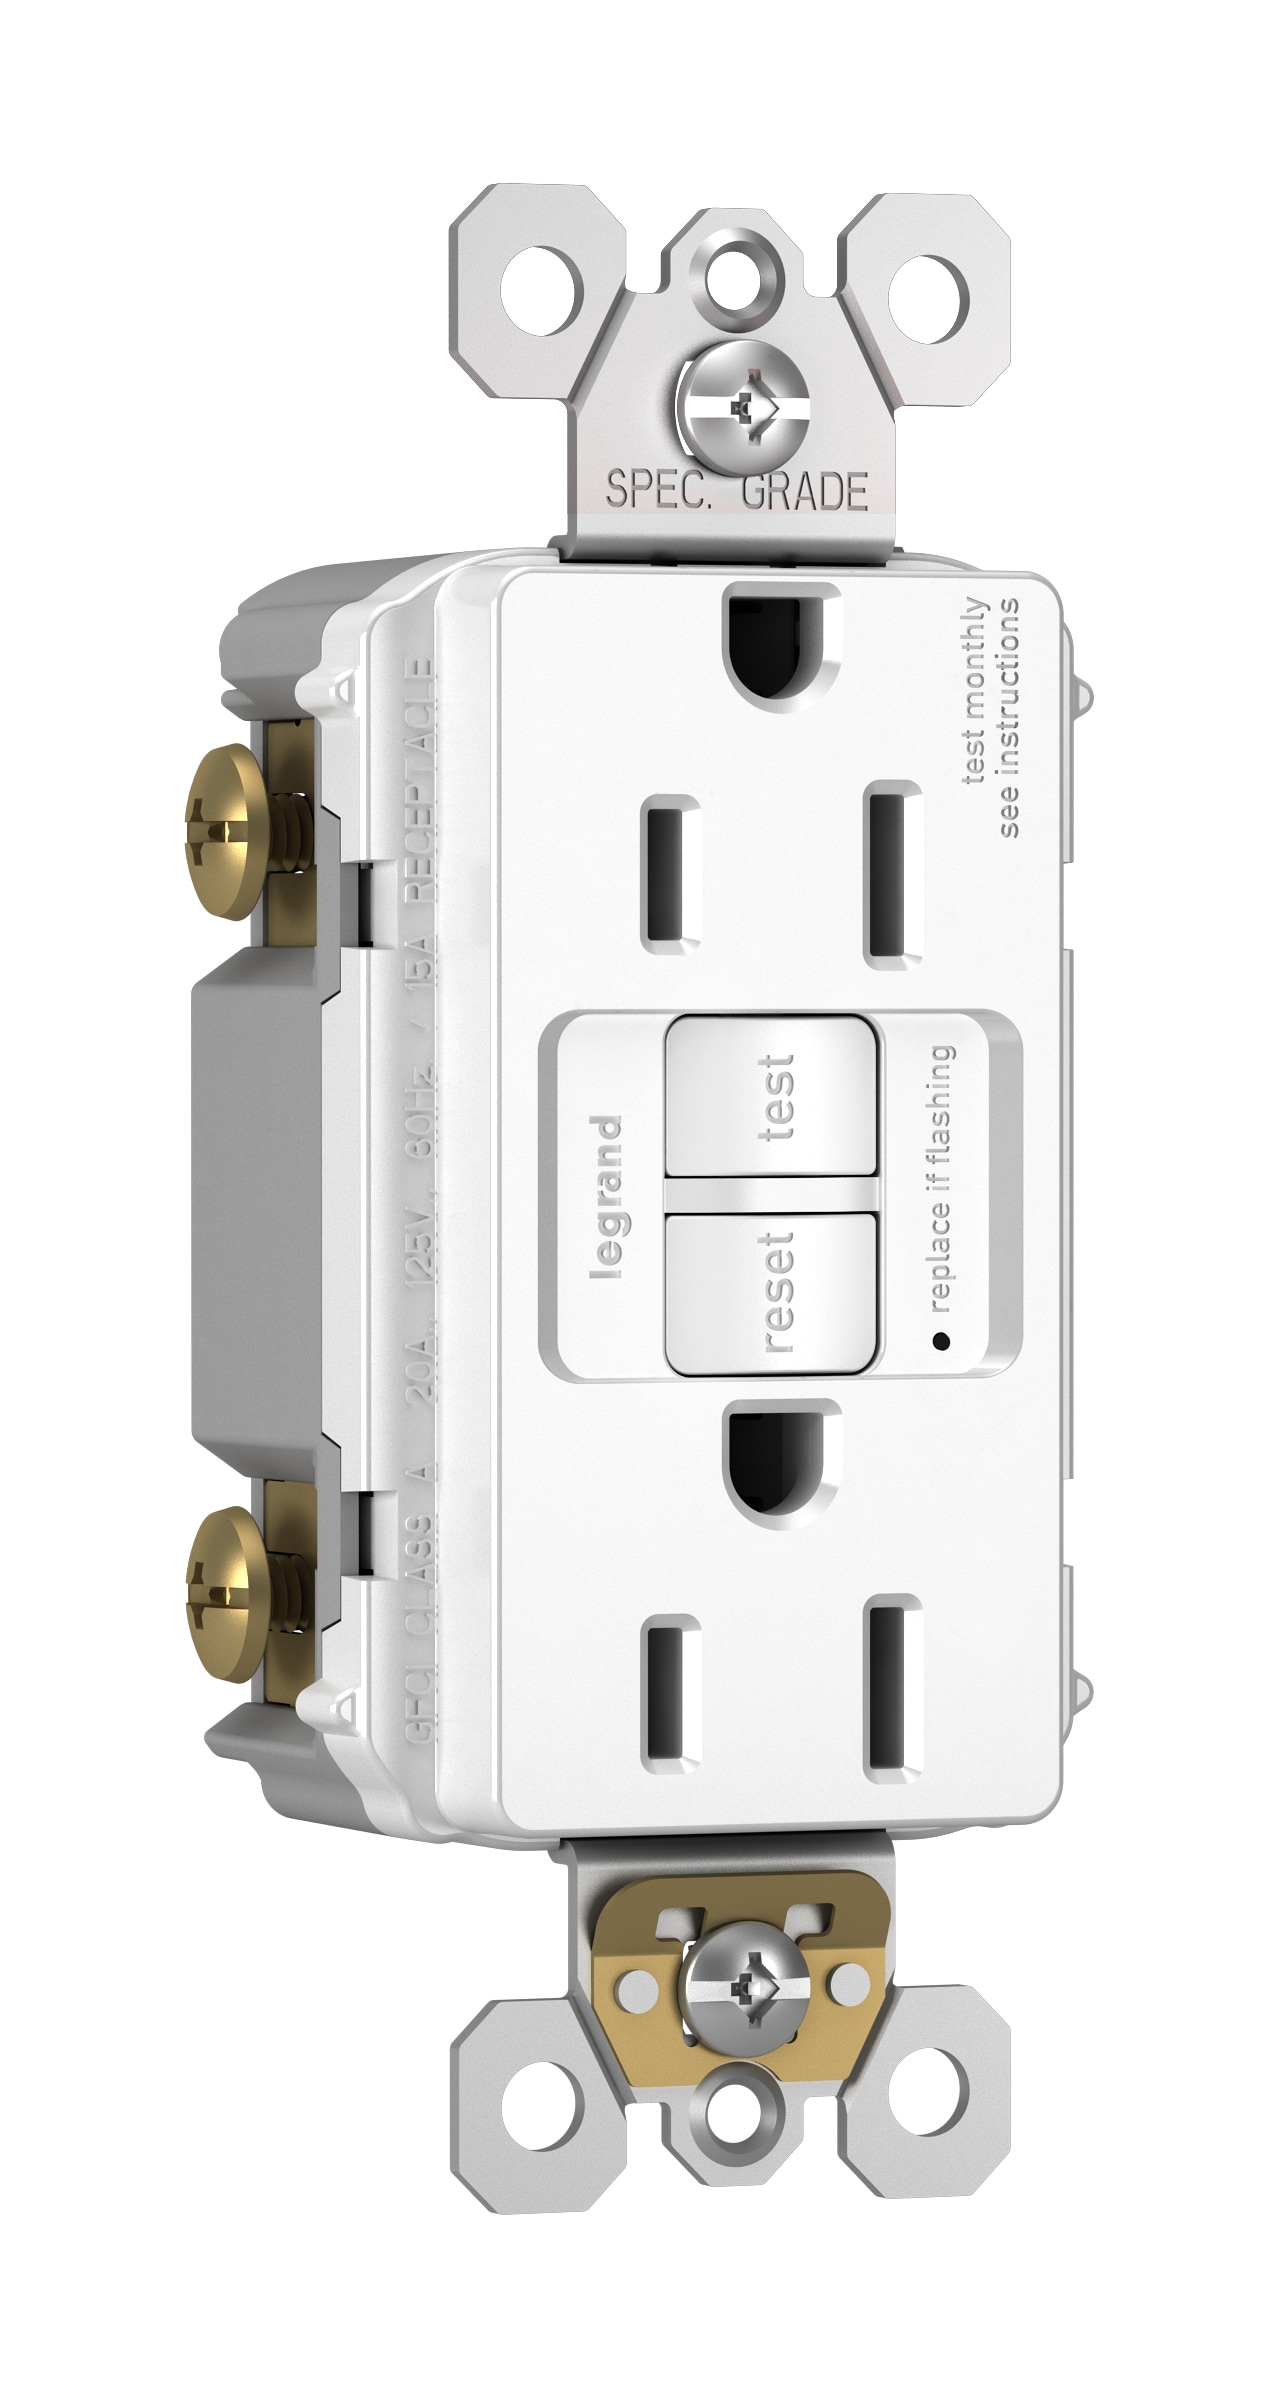 radiant 15A Smart Wi-Fi Outlet │ Legrand